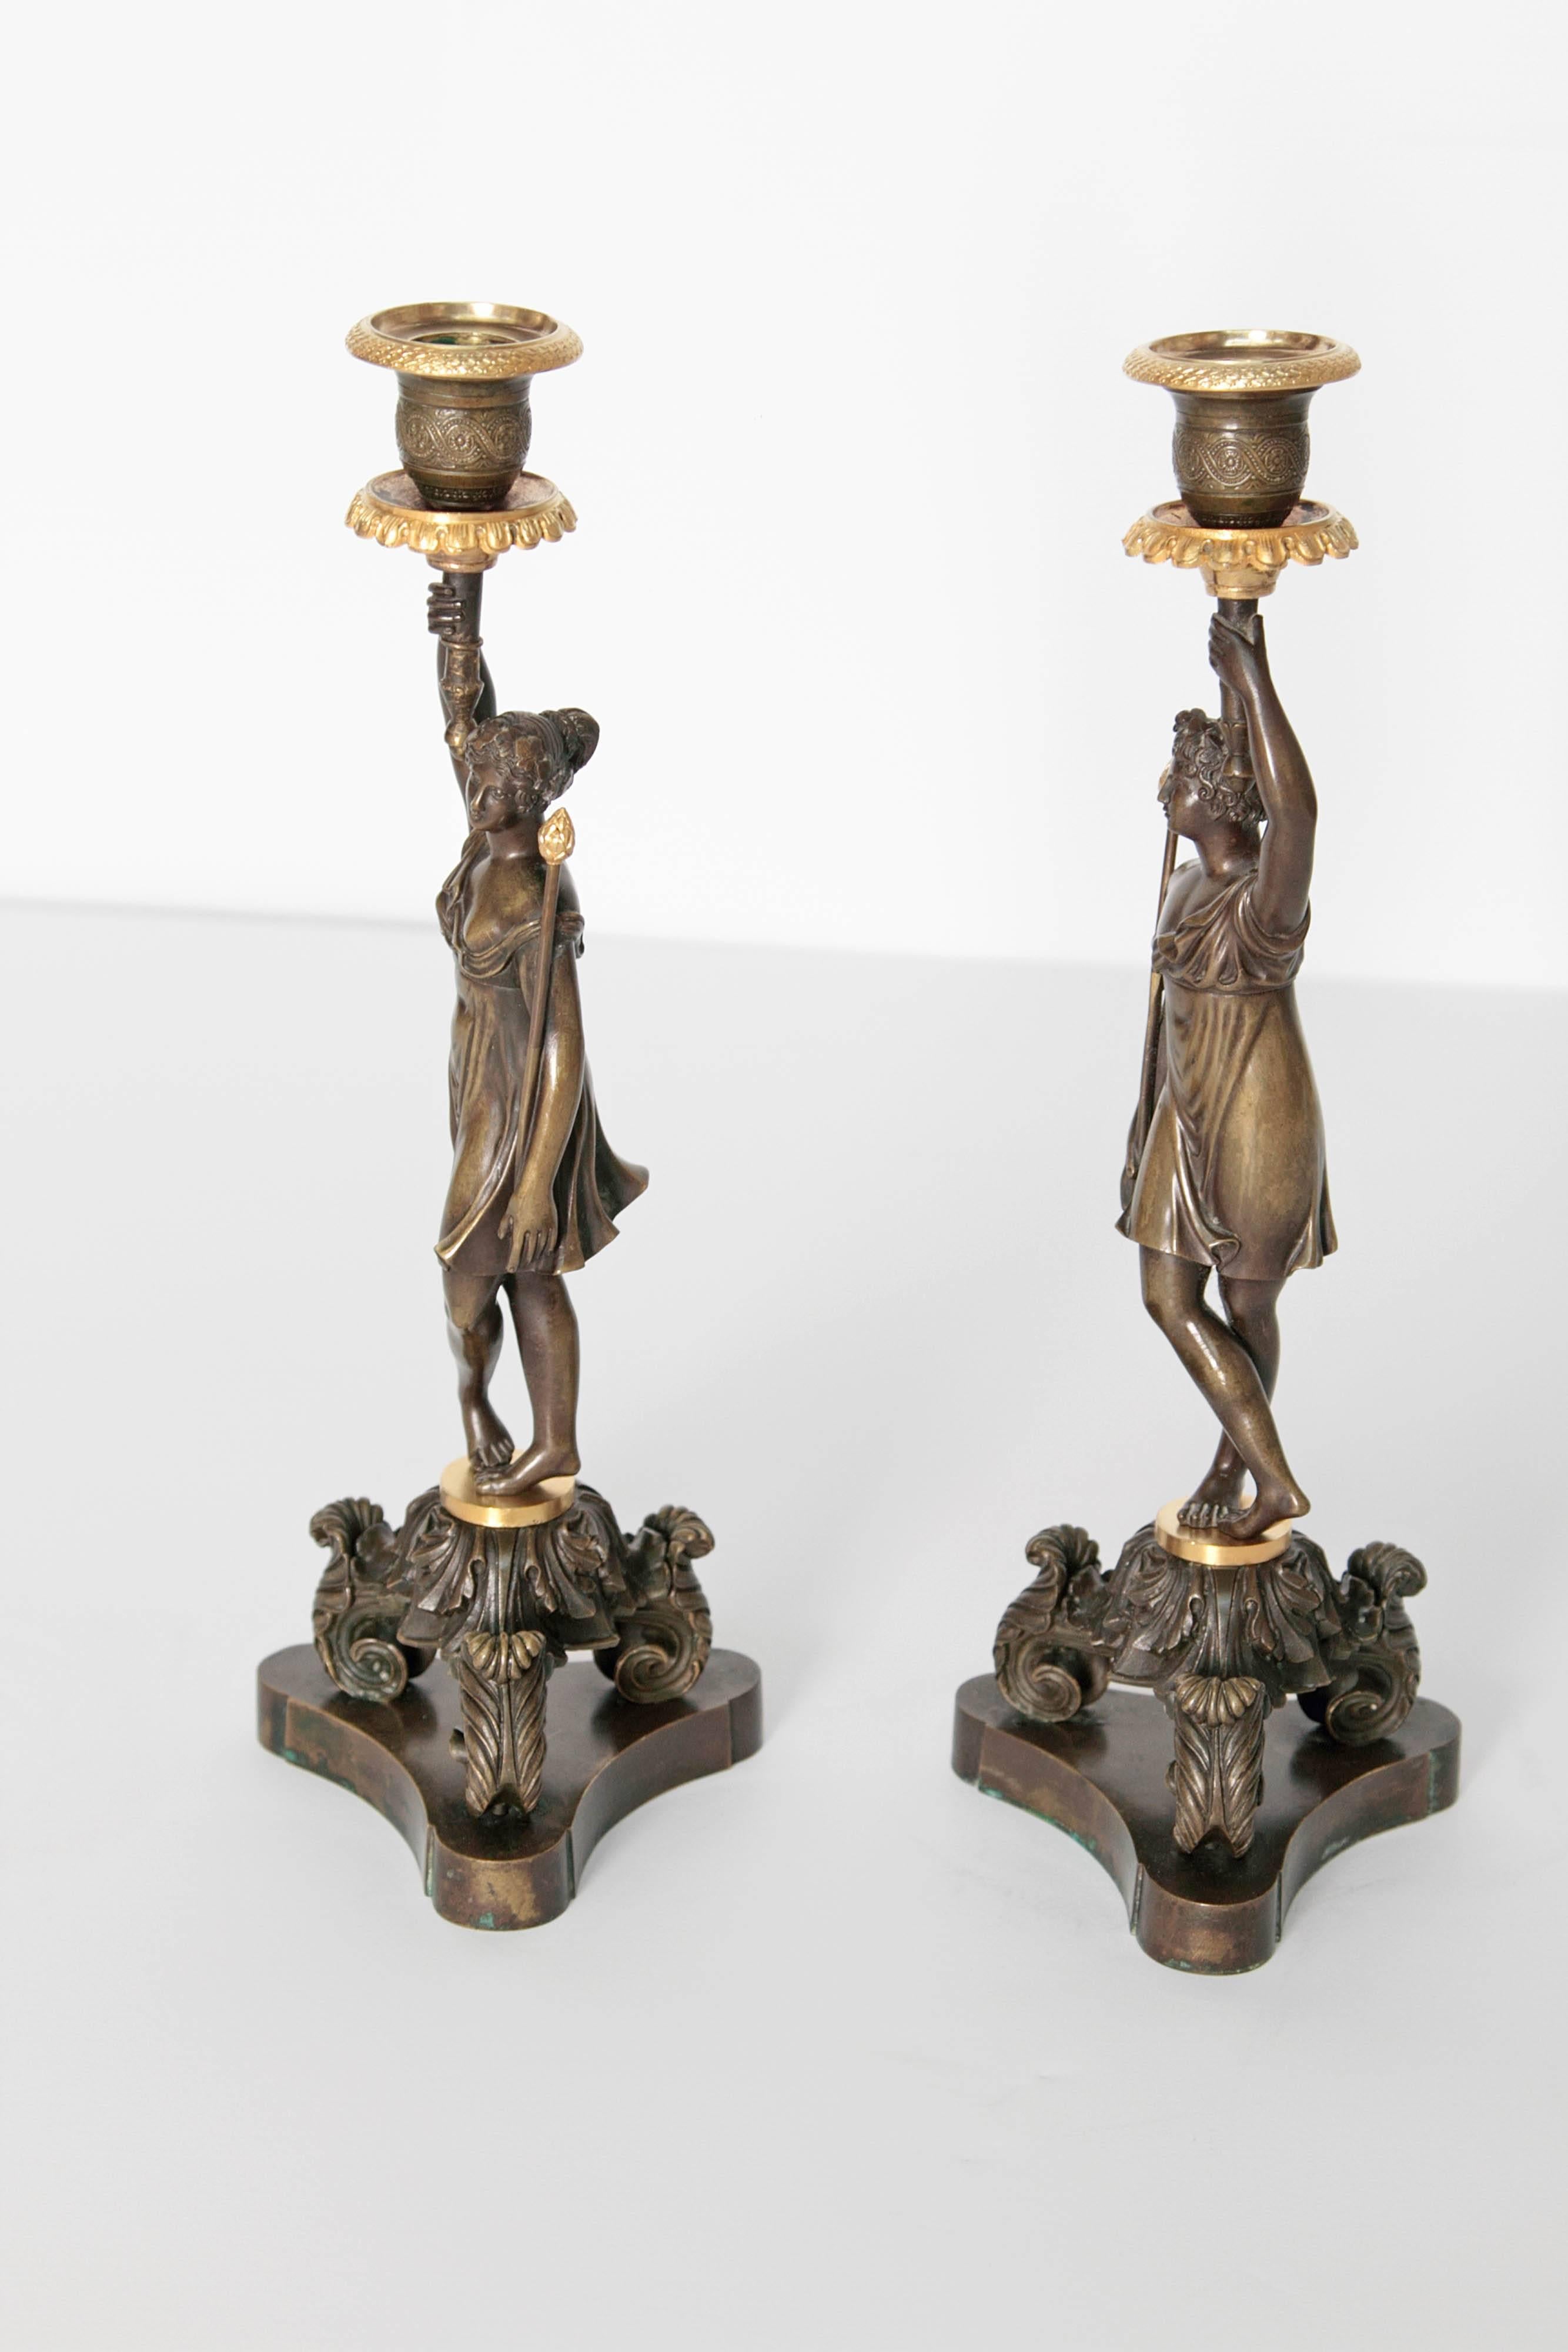 Neoclassical Revival 19th Century French Pair of Bronze and Gilt Bronze Candlesticks For Sale